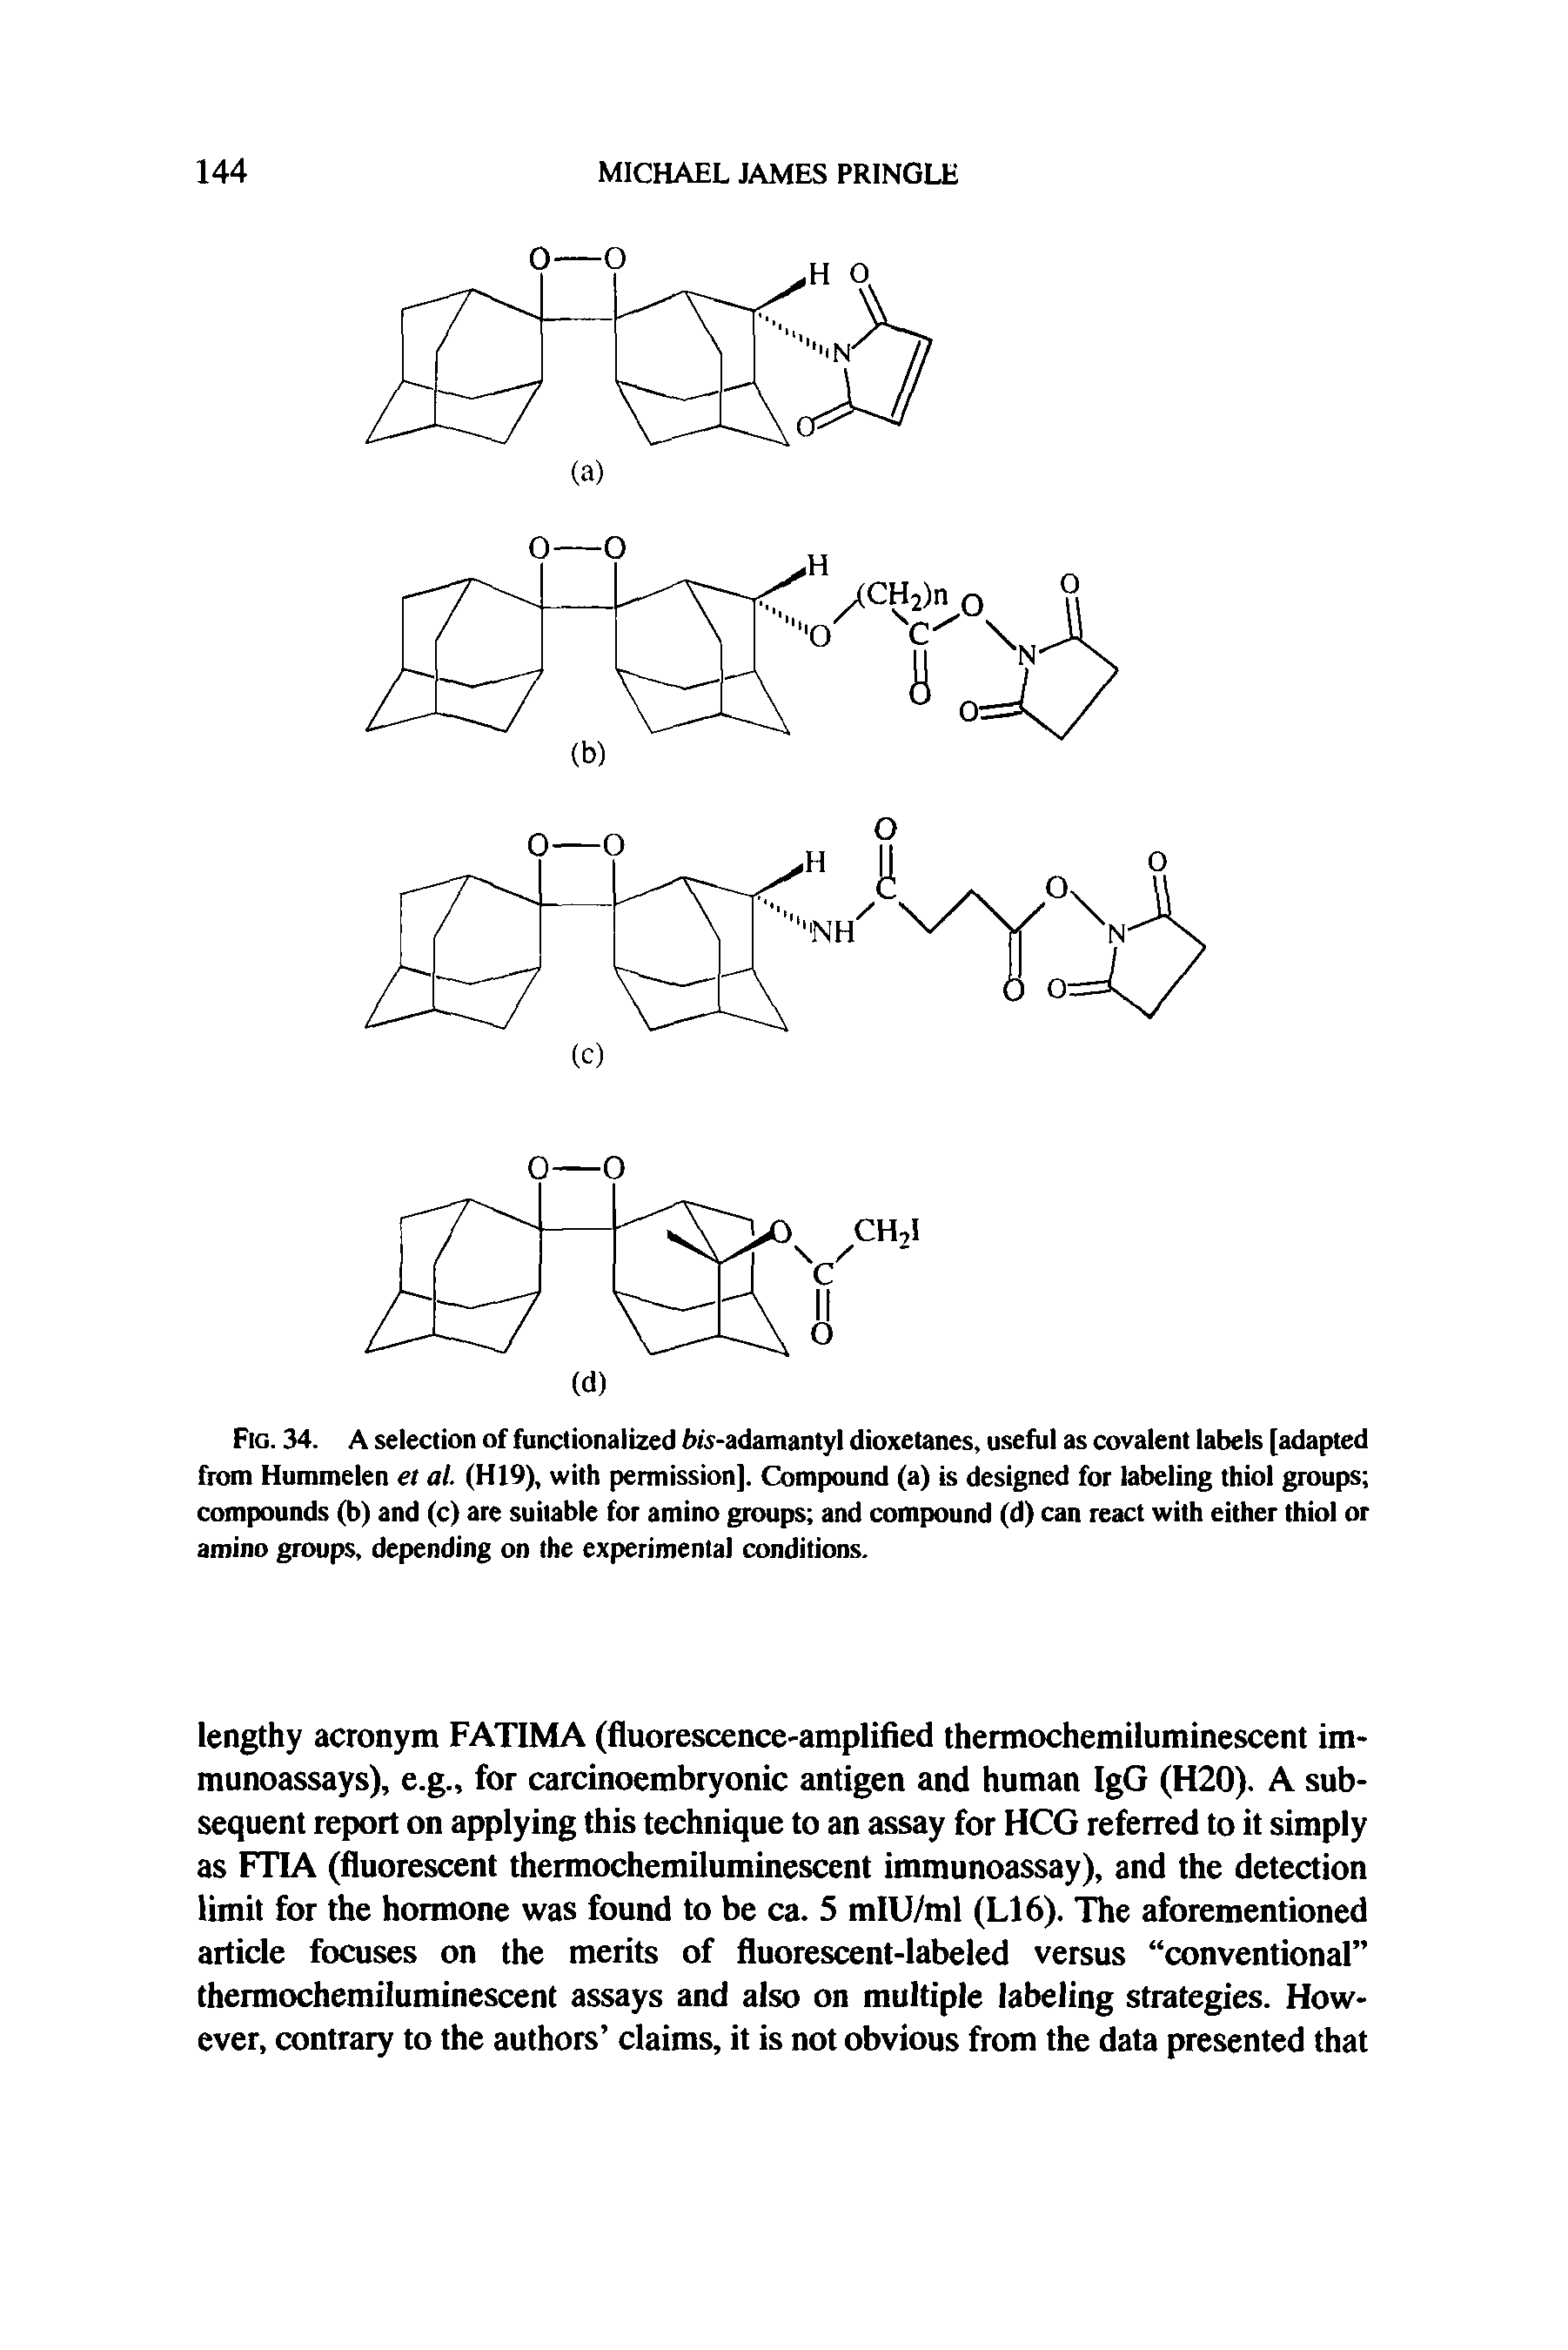 Fig. 34. A selection of functionalized f>is-adamantyl dioxetanes, useful as covalent labels [adapted from Hummelen et al. (H19), with permission]. Compound (a) is designed for labeling thiol groups compounds (b) and (c) are suitable for amino groups and compound (d) can react with either thiol or amino groups, depending on the experimental conditions.